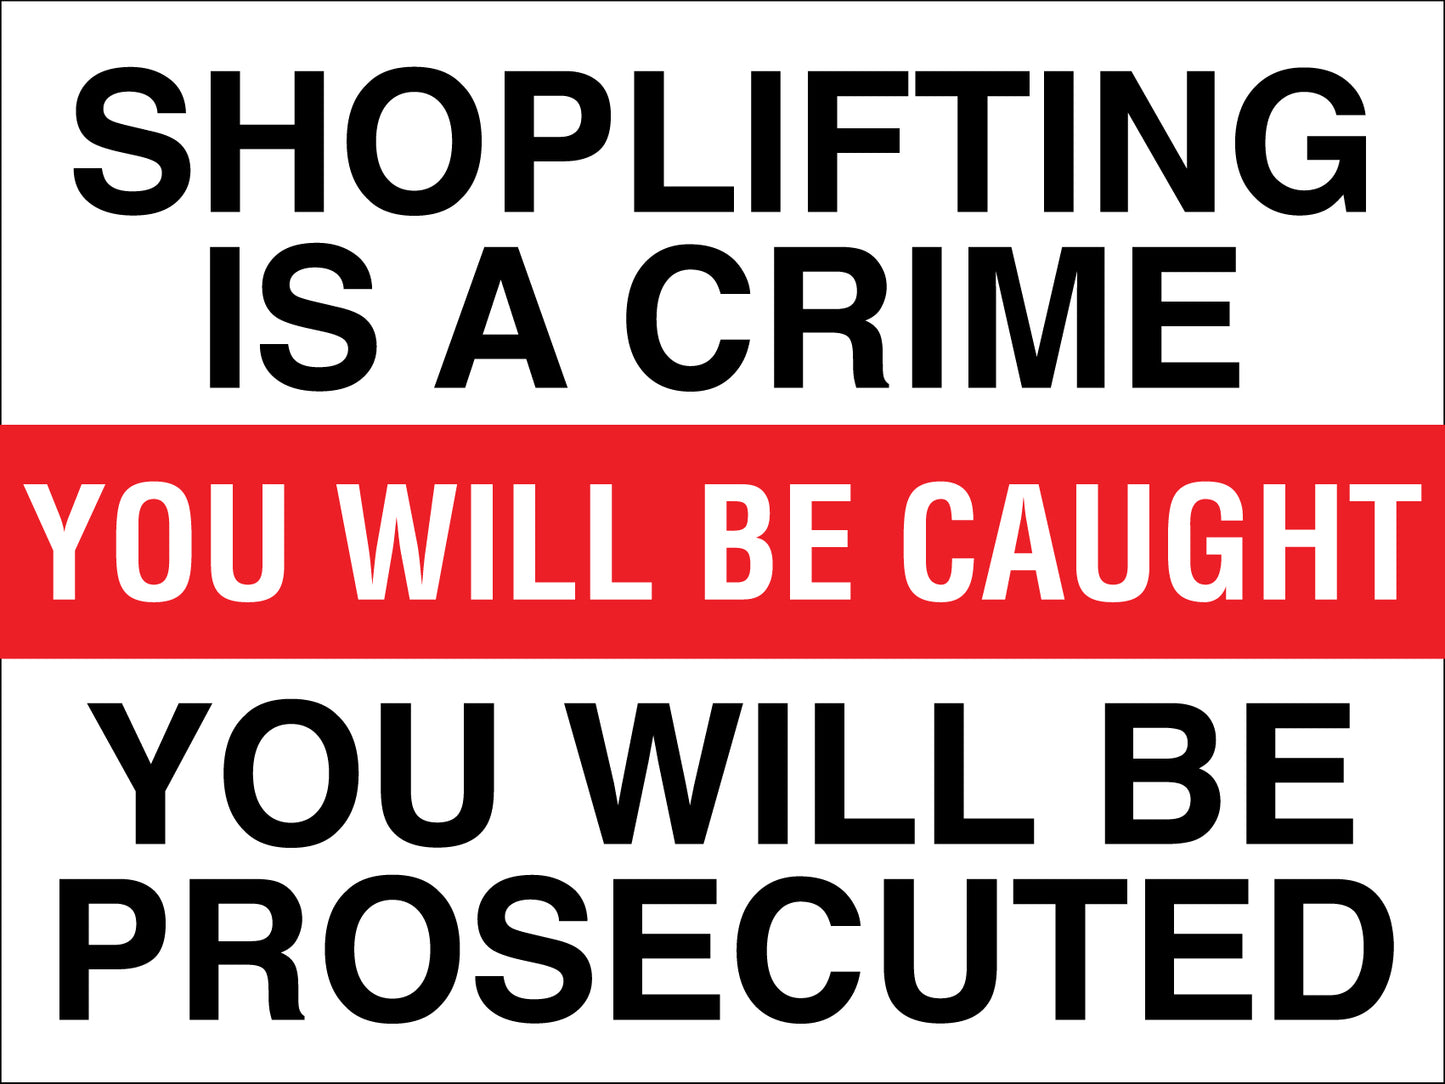 Shoplifting Is A Crime You Will Be Caught You Will Be Prosecuted Sign